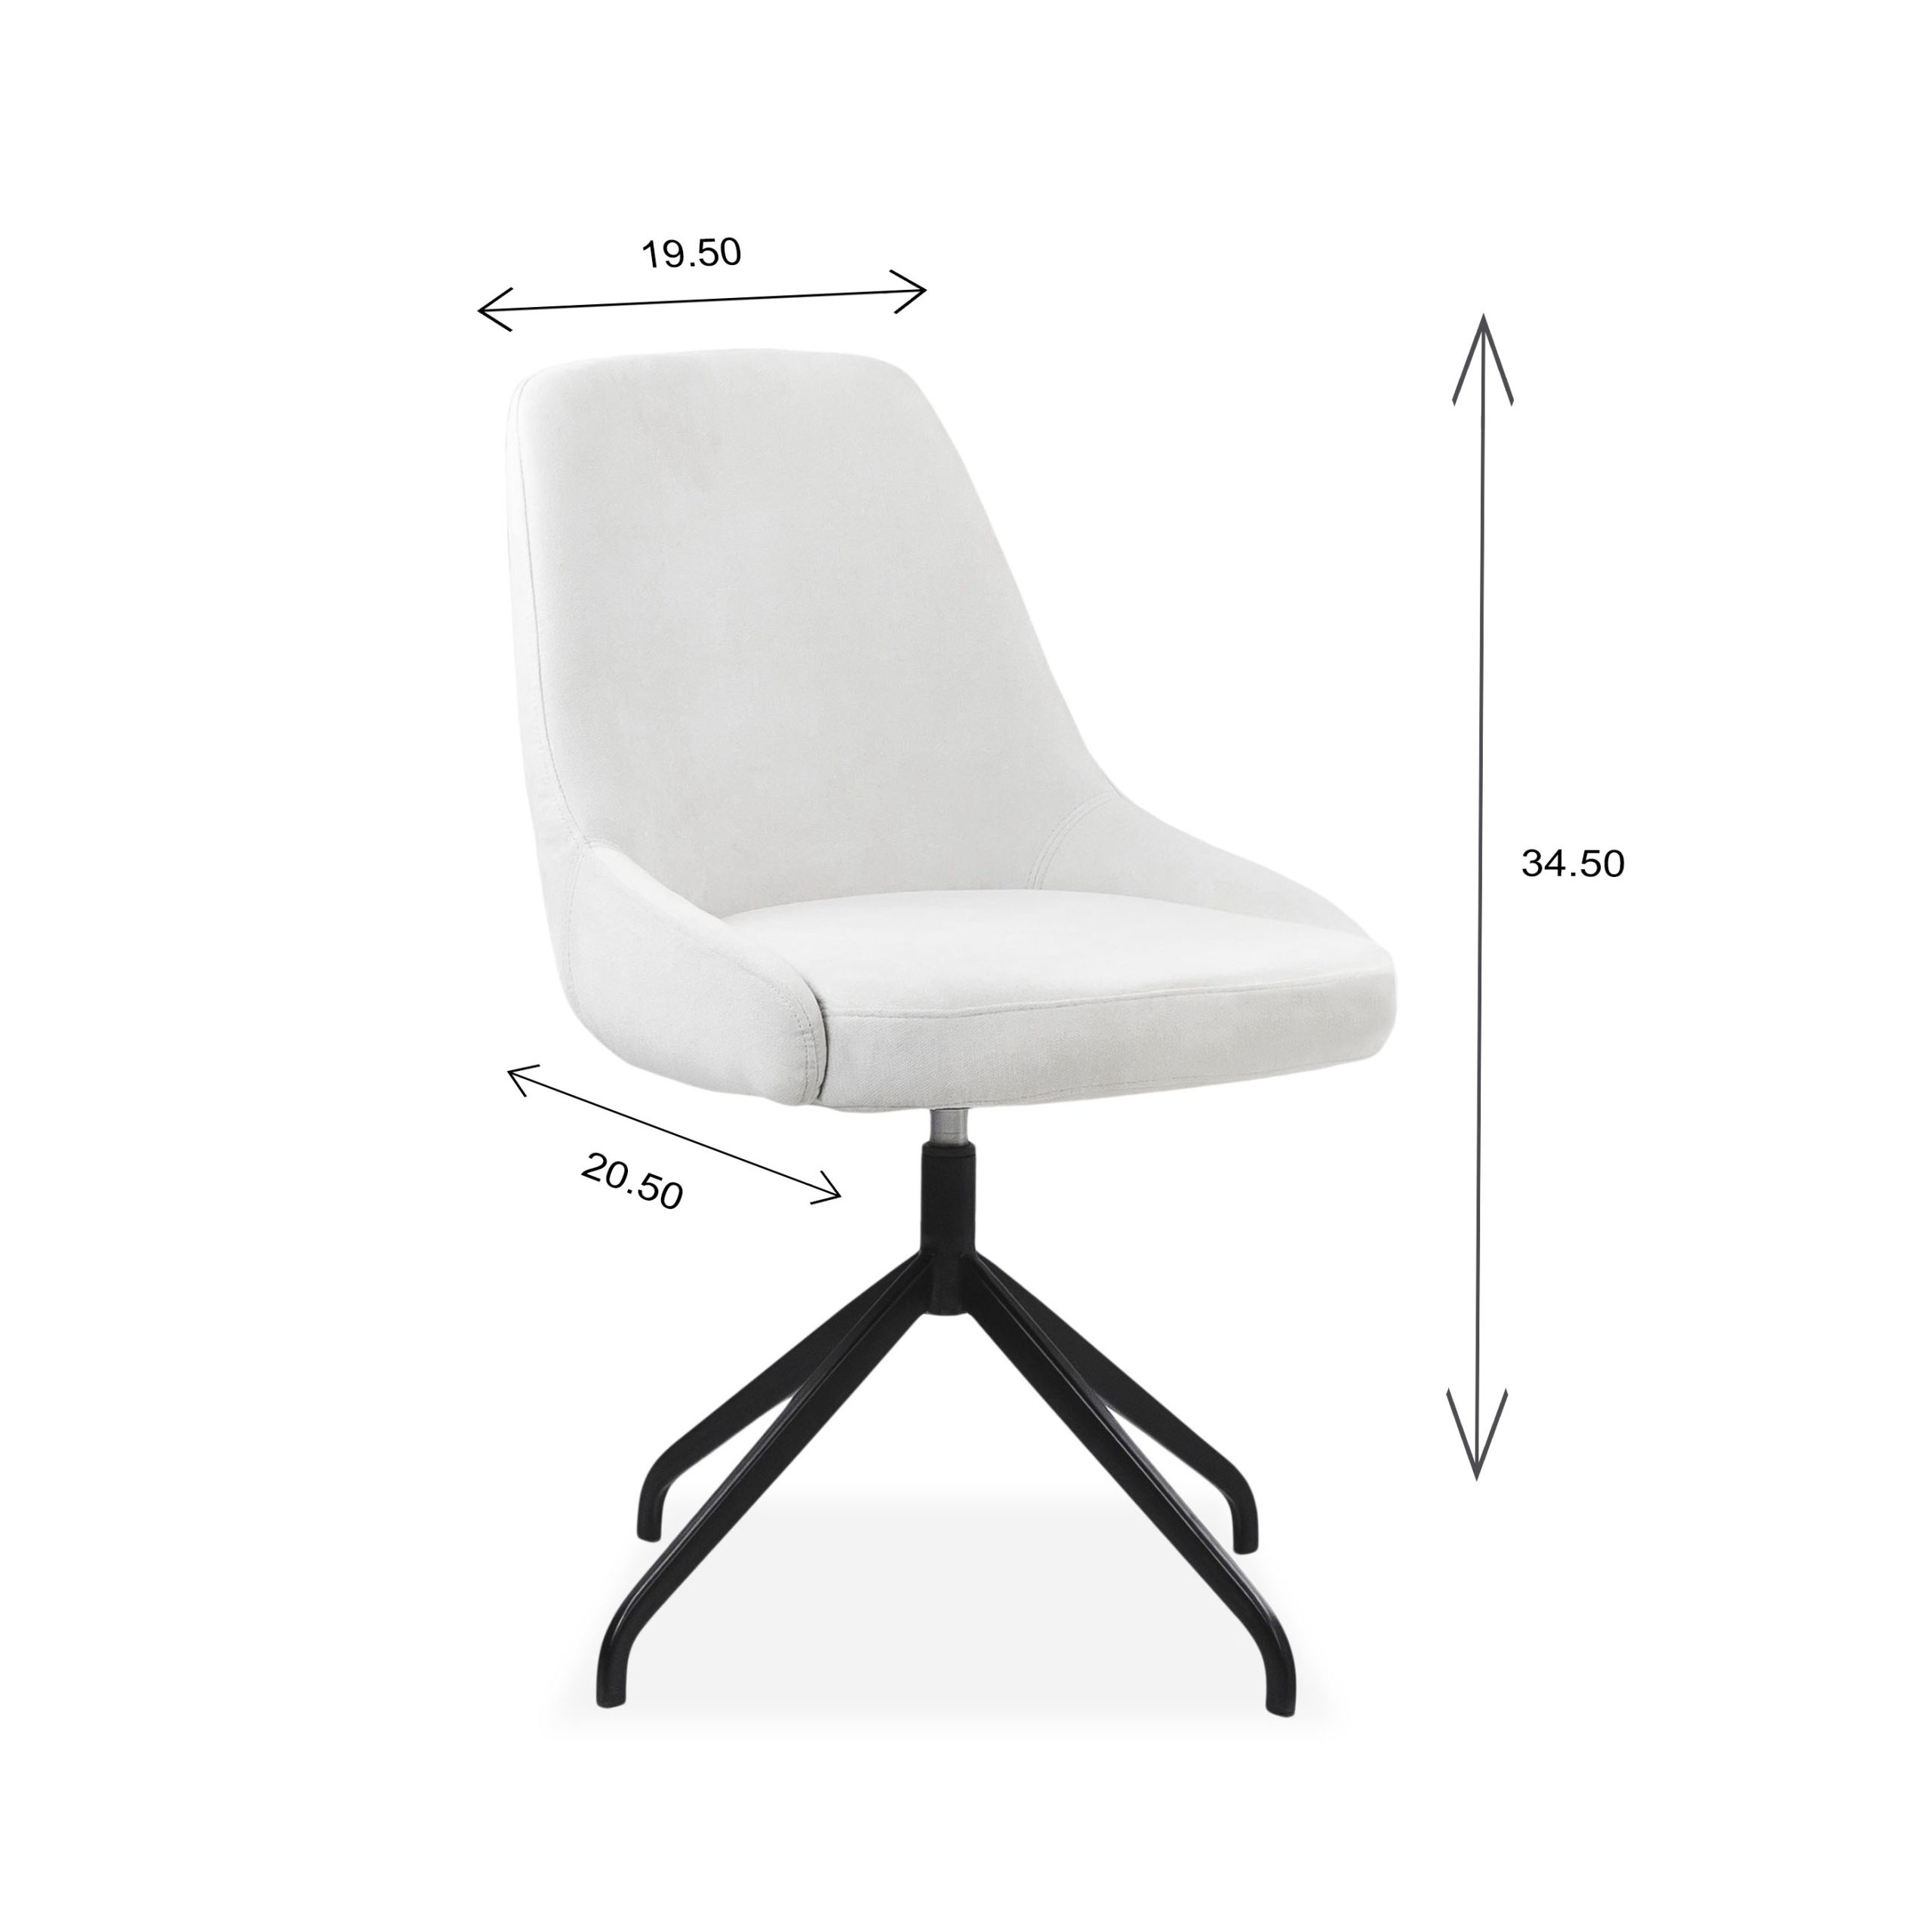 Angie Chair, Dimensions